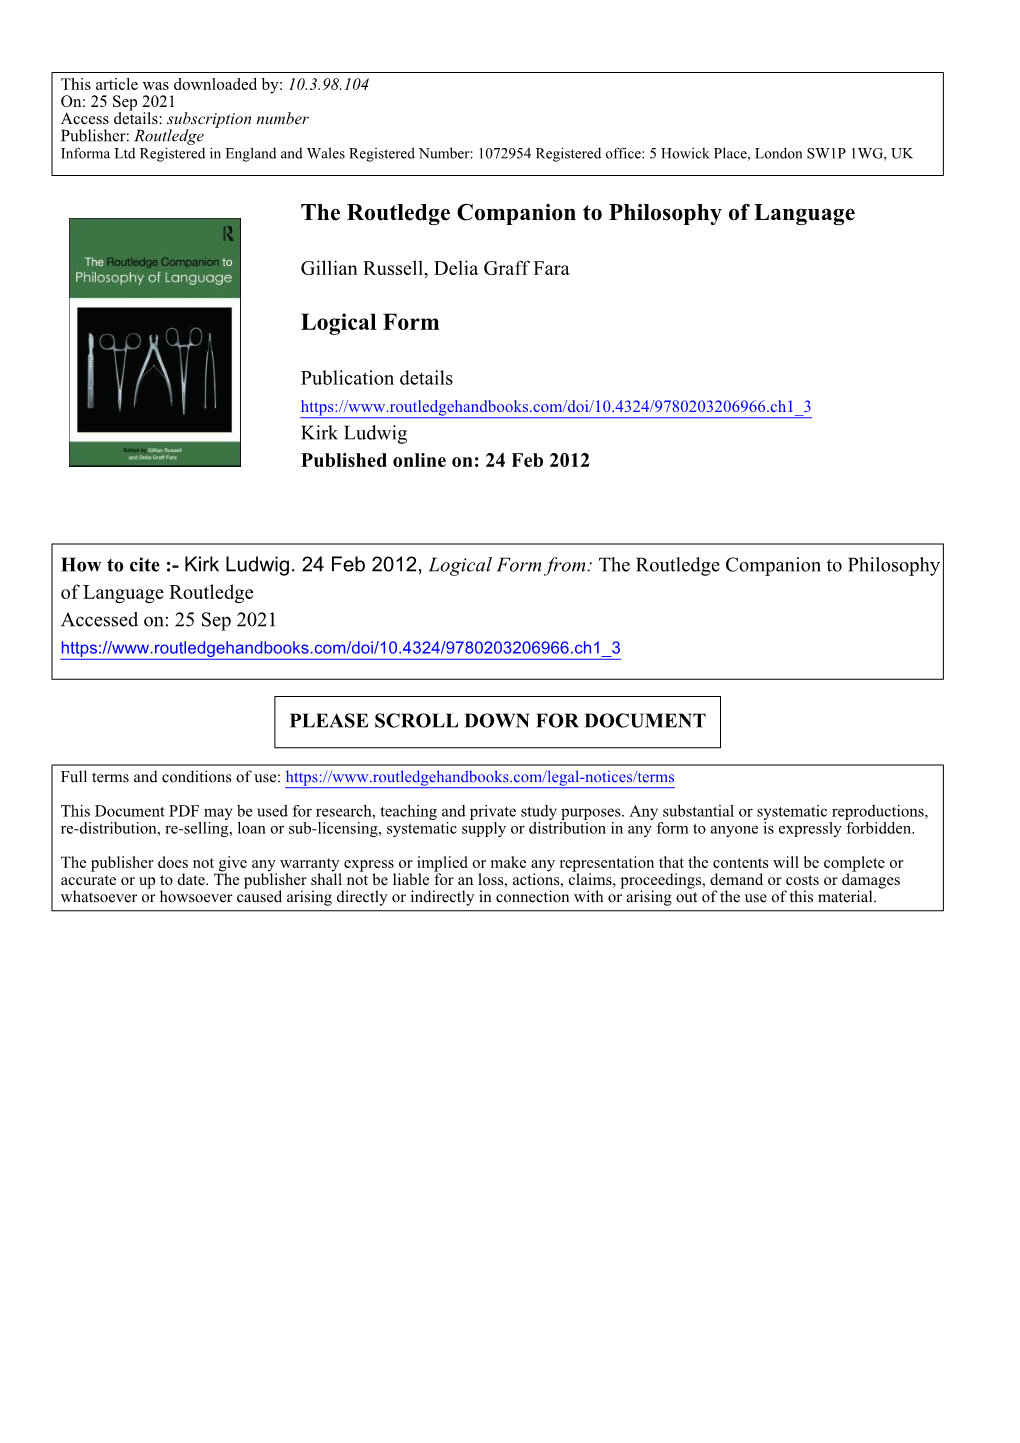 The Routledge Companion to Philosophy of Language Logical Form